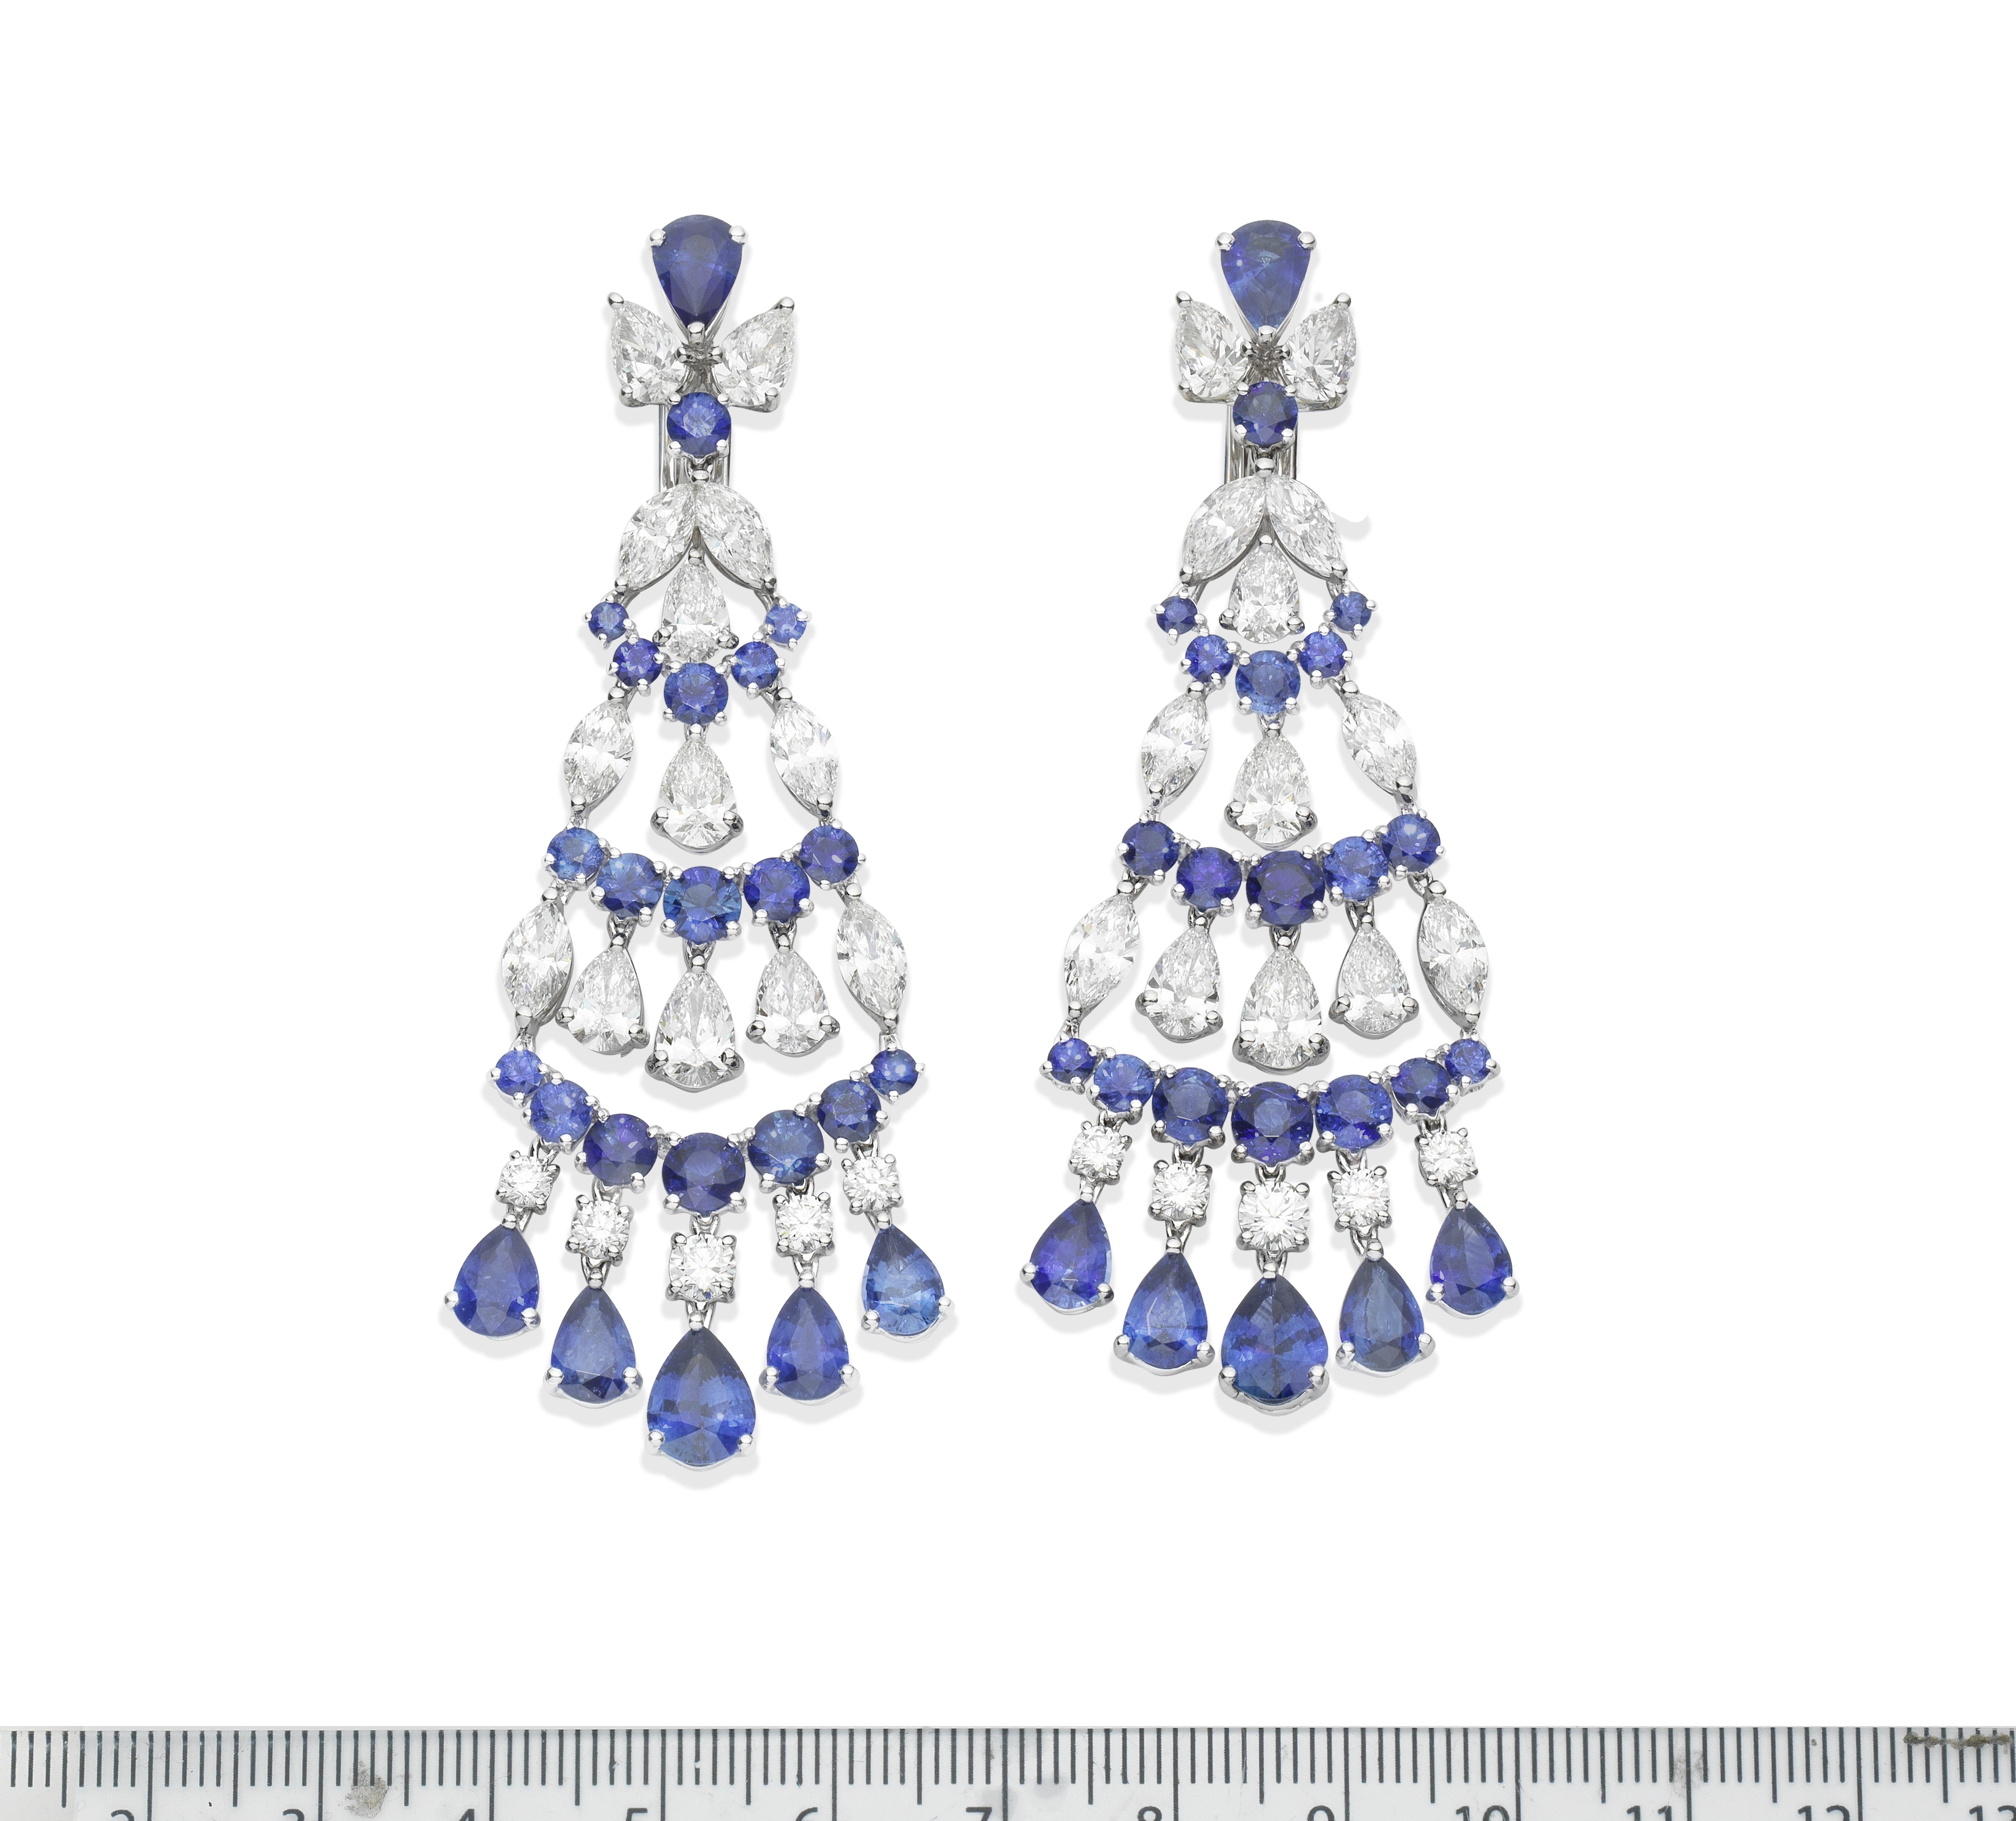 A PAIR OF SAPPHIRE AND DIAMOND 'CHANDELIER' EARRINGS, BY GRAFF